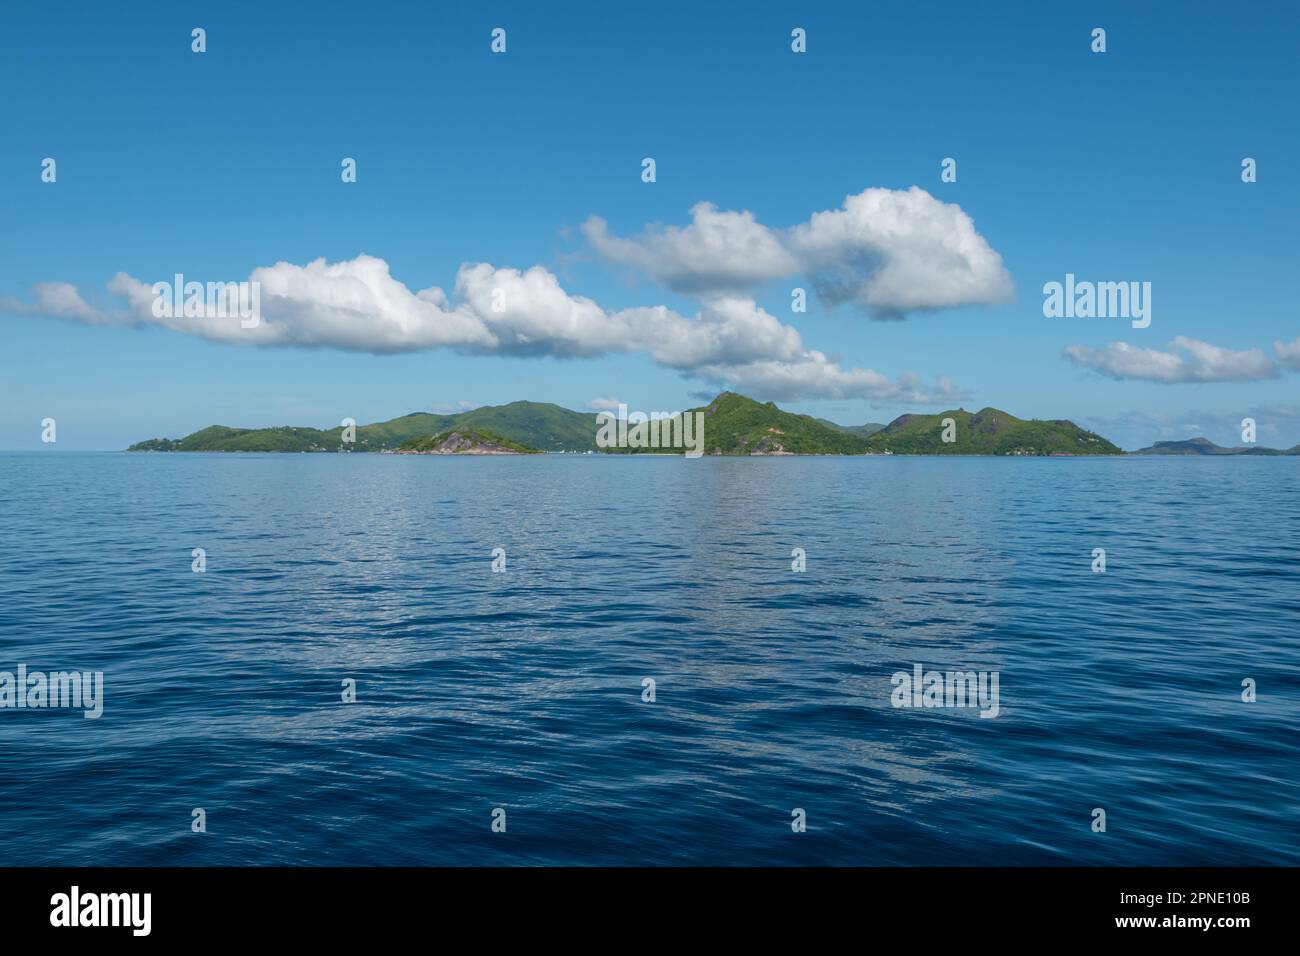 Panoramic view of tropical Islands in Indian Ocean, Seychelles. Stock Photo